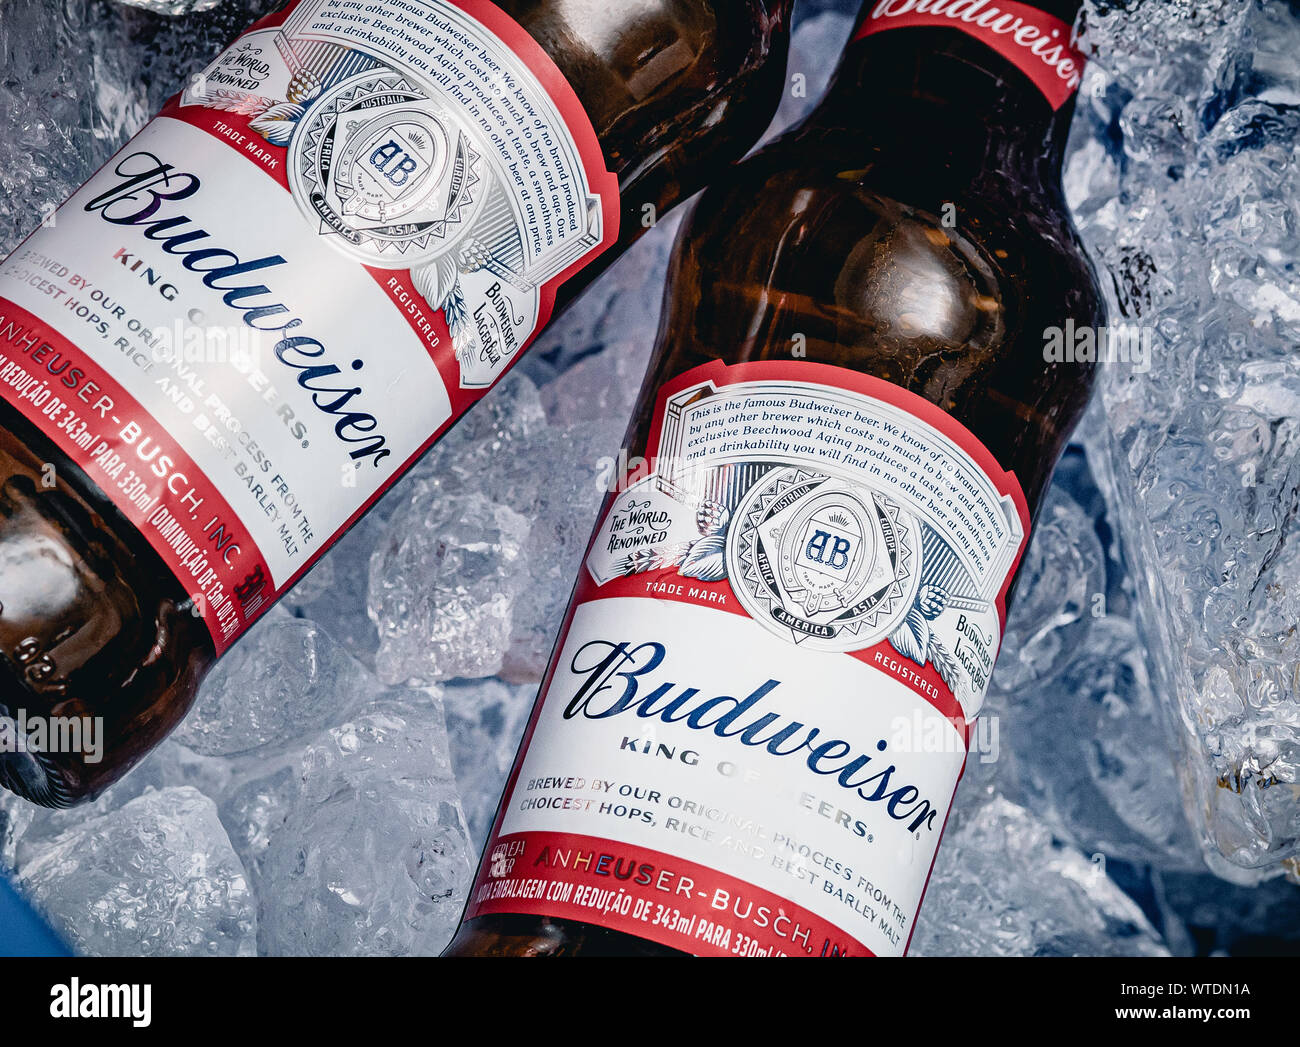 Brasilia, Federal District - Brazil. Circa 2019. Photograph of two Budweiser beer bottles in a cooler with ice. Stock Photo